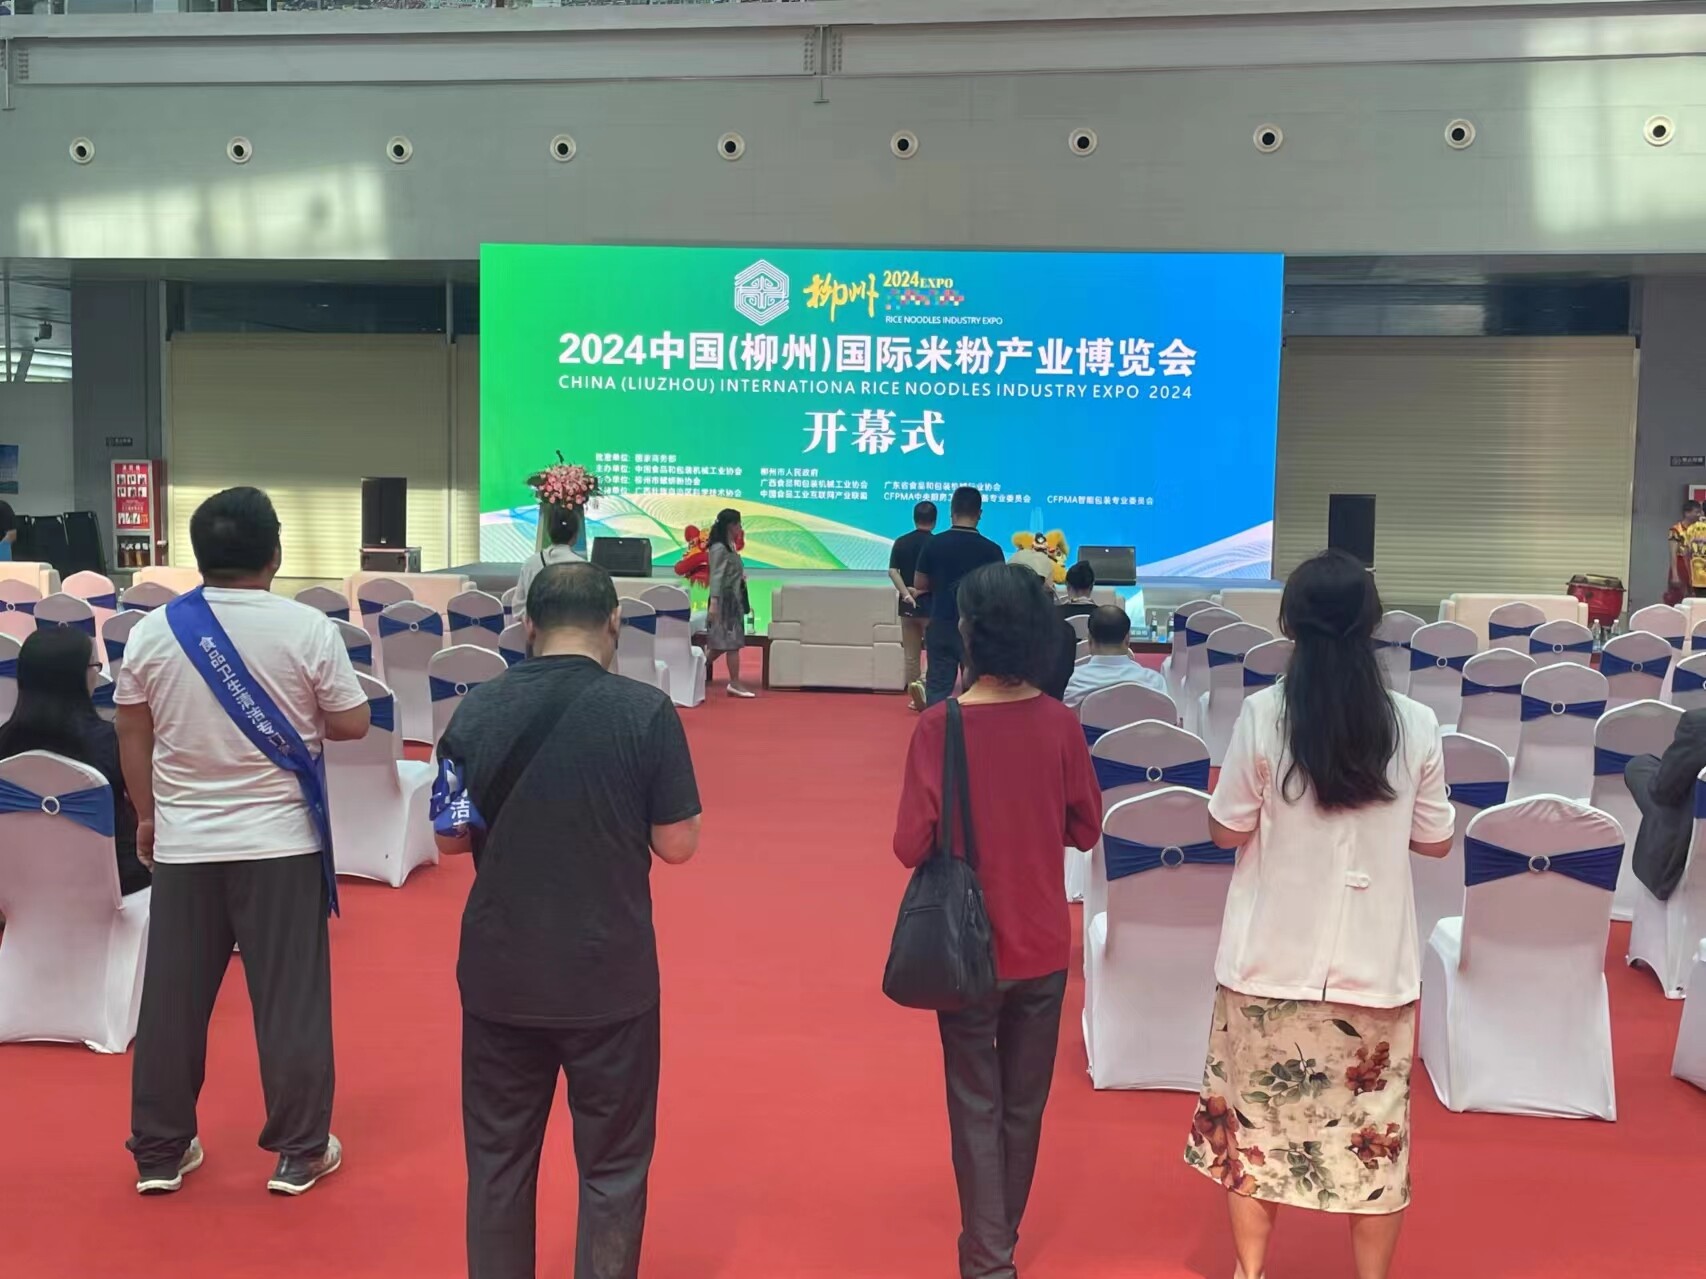 Wilpac Packaging Machinery at the Liuzhou International Rice Noodle Industry Expo